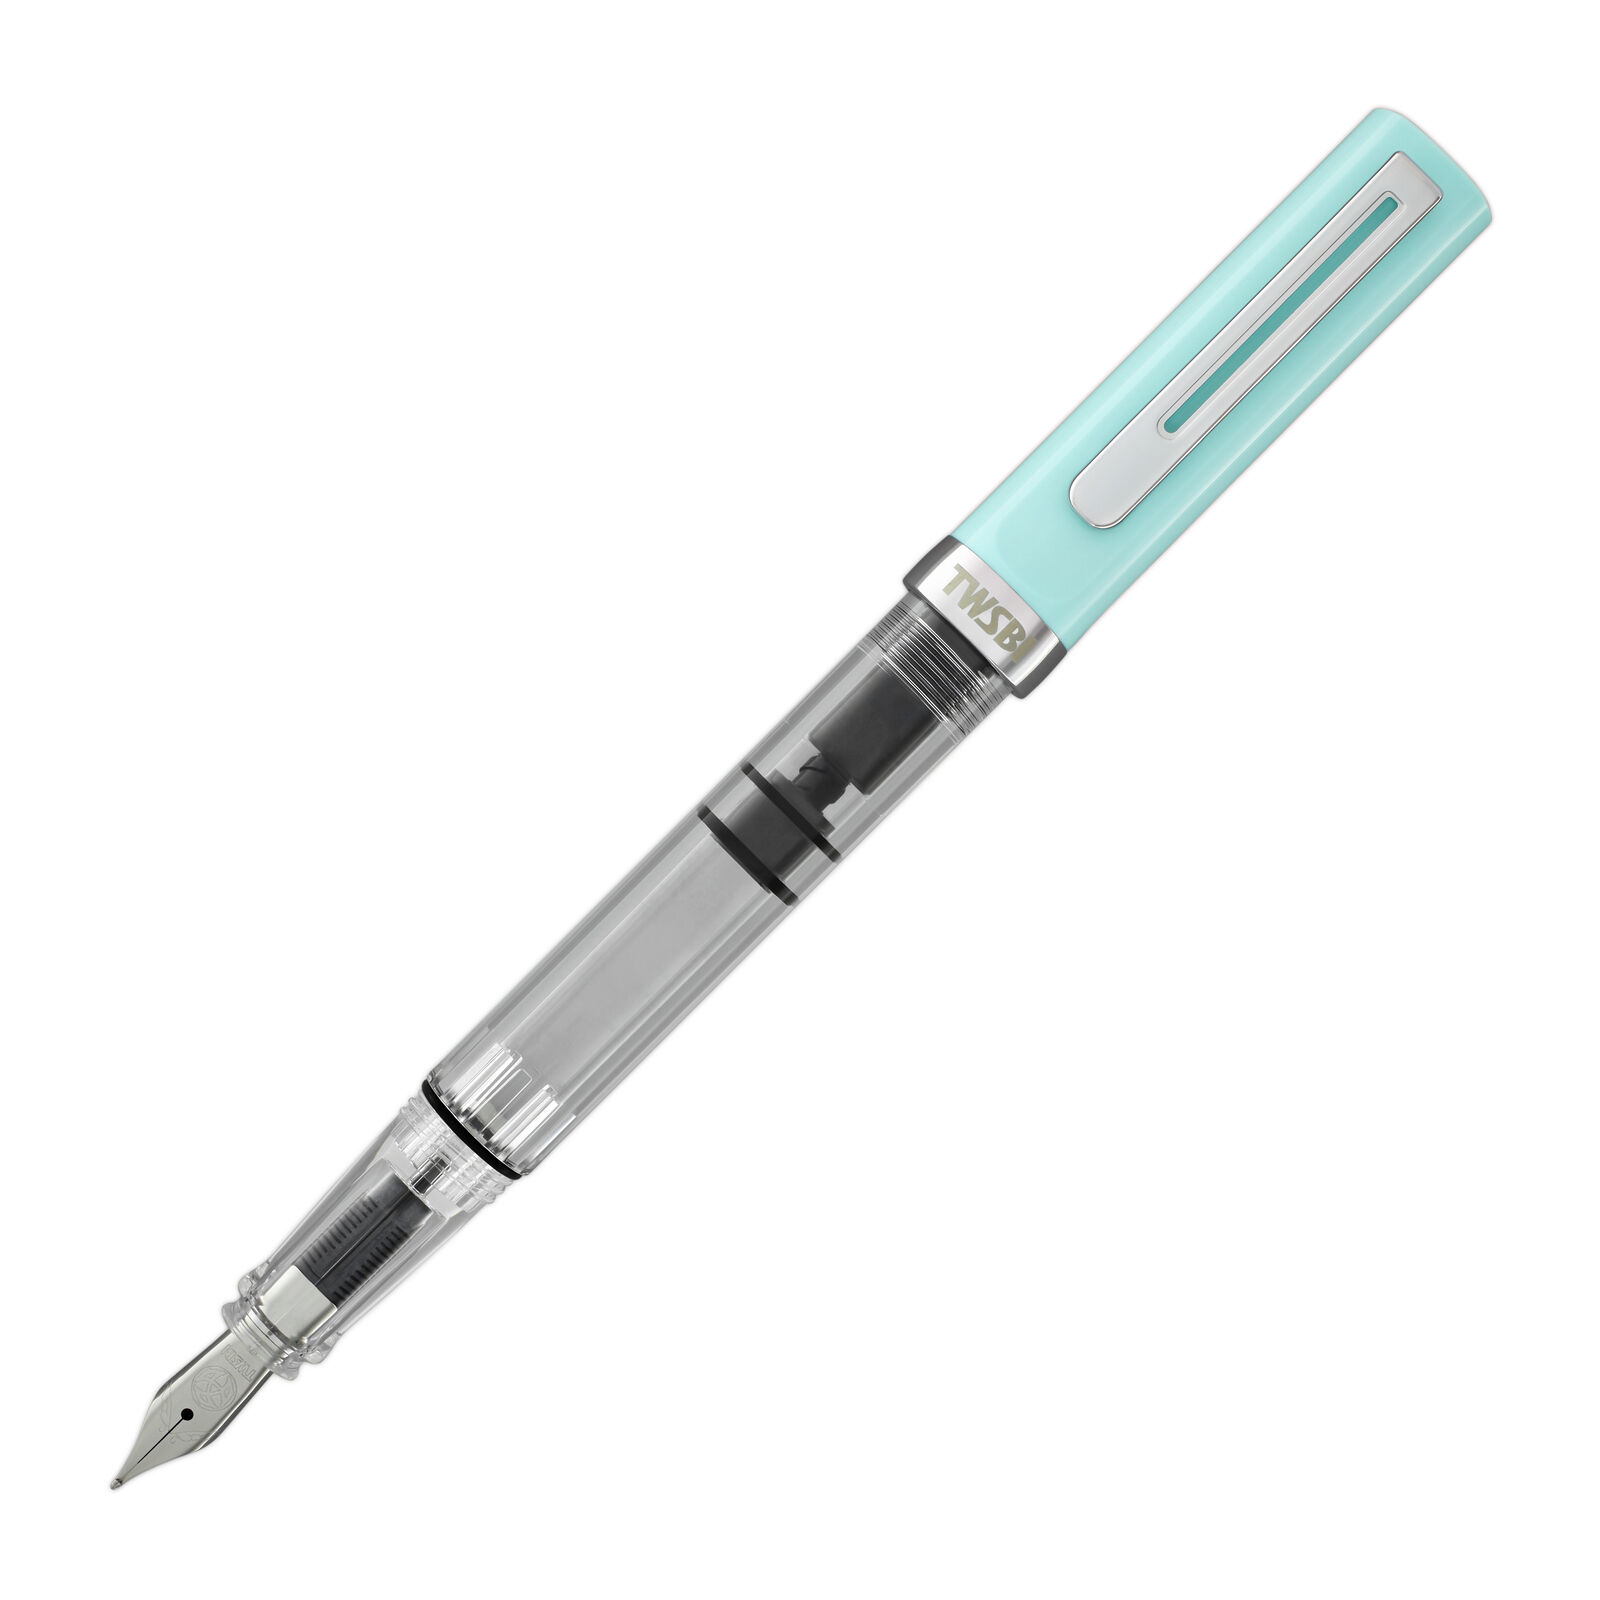 TWSBI Eco-T Fountain Pen in Mint Blue Special Edition - Broad Point - NEW in box